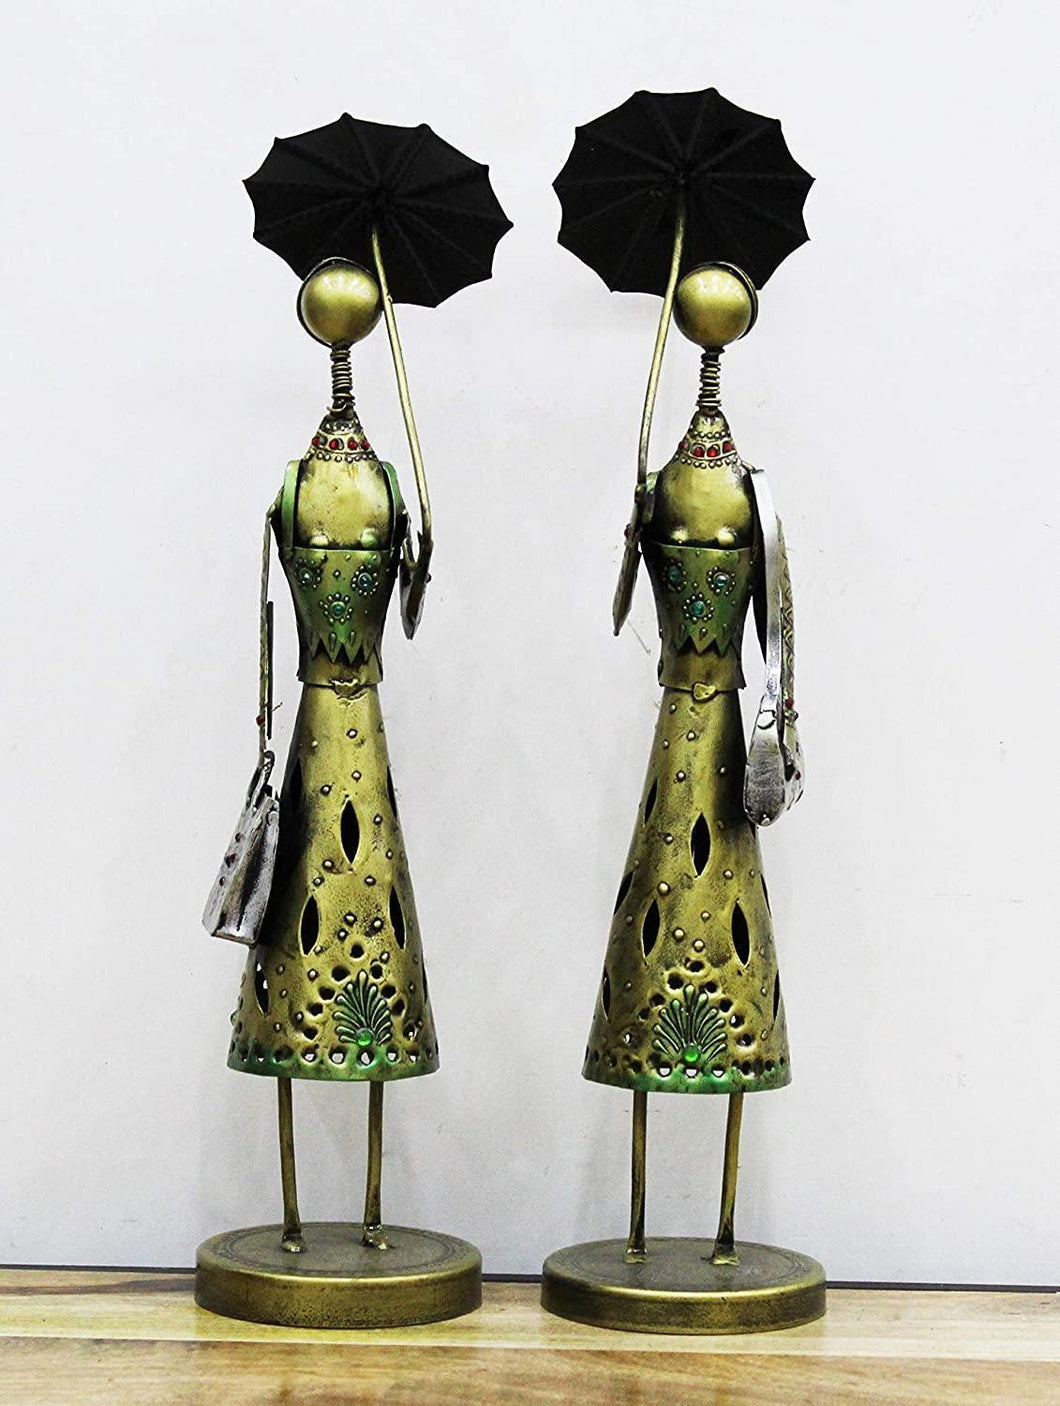 Iron Handcrafted Umbrella Lady - Home & Office Decor Set of 2 Pieces Size 10.2 x 10.2 x 44.5 cm - Style It by Hanika